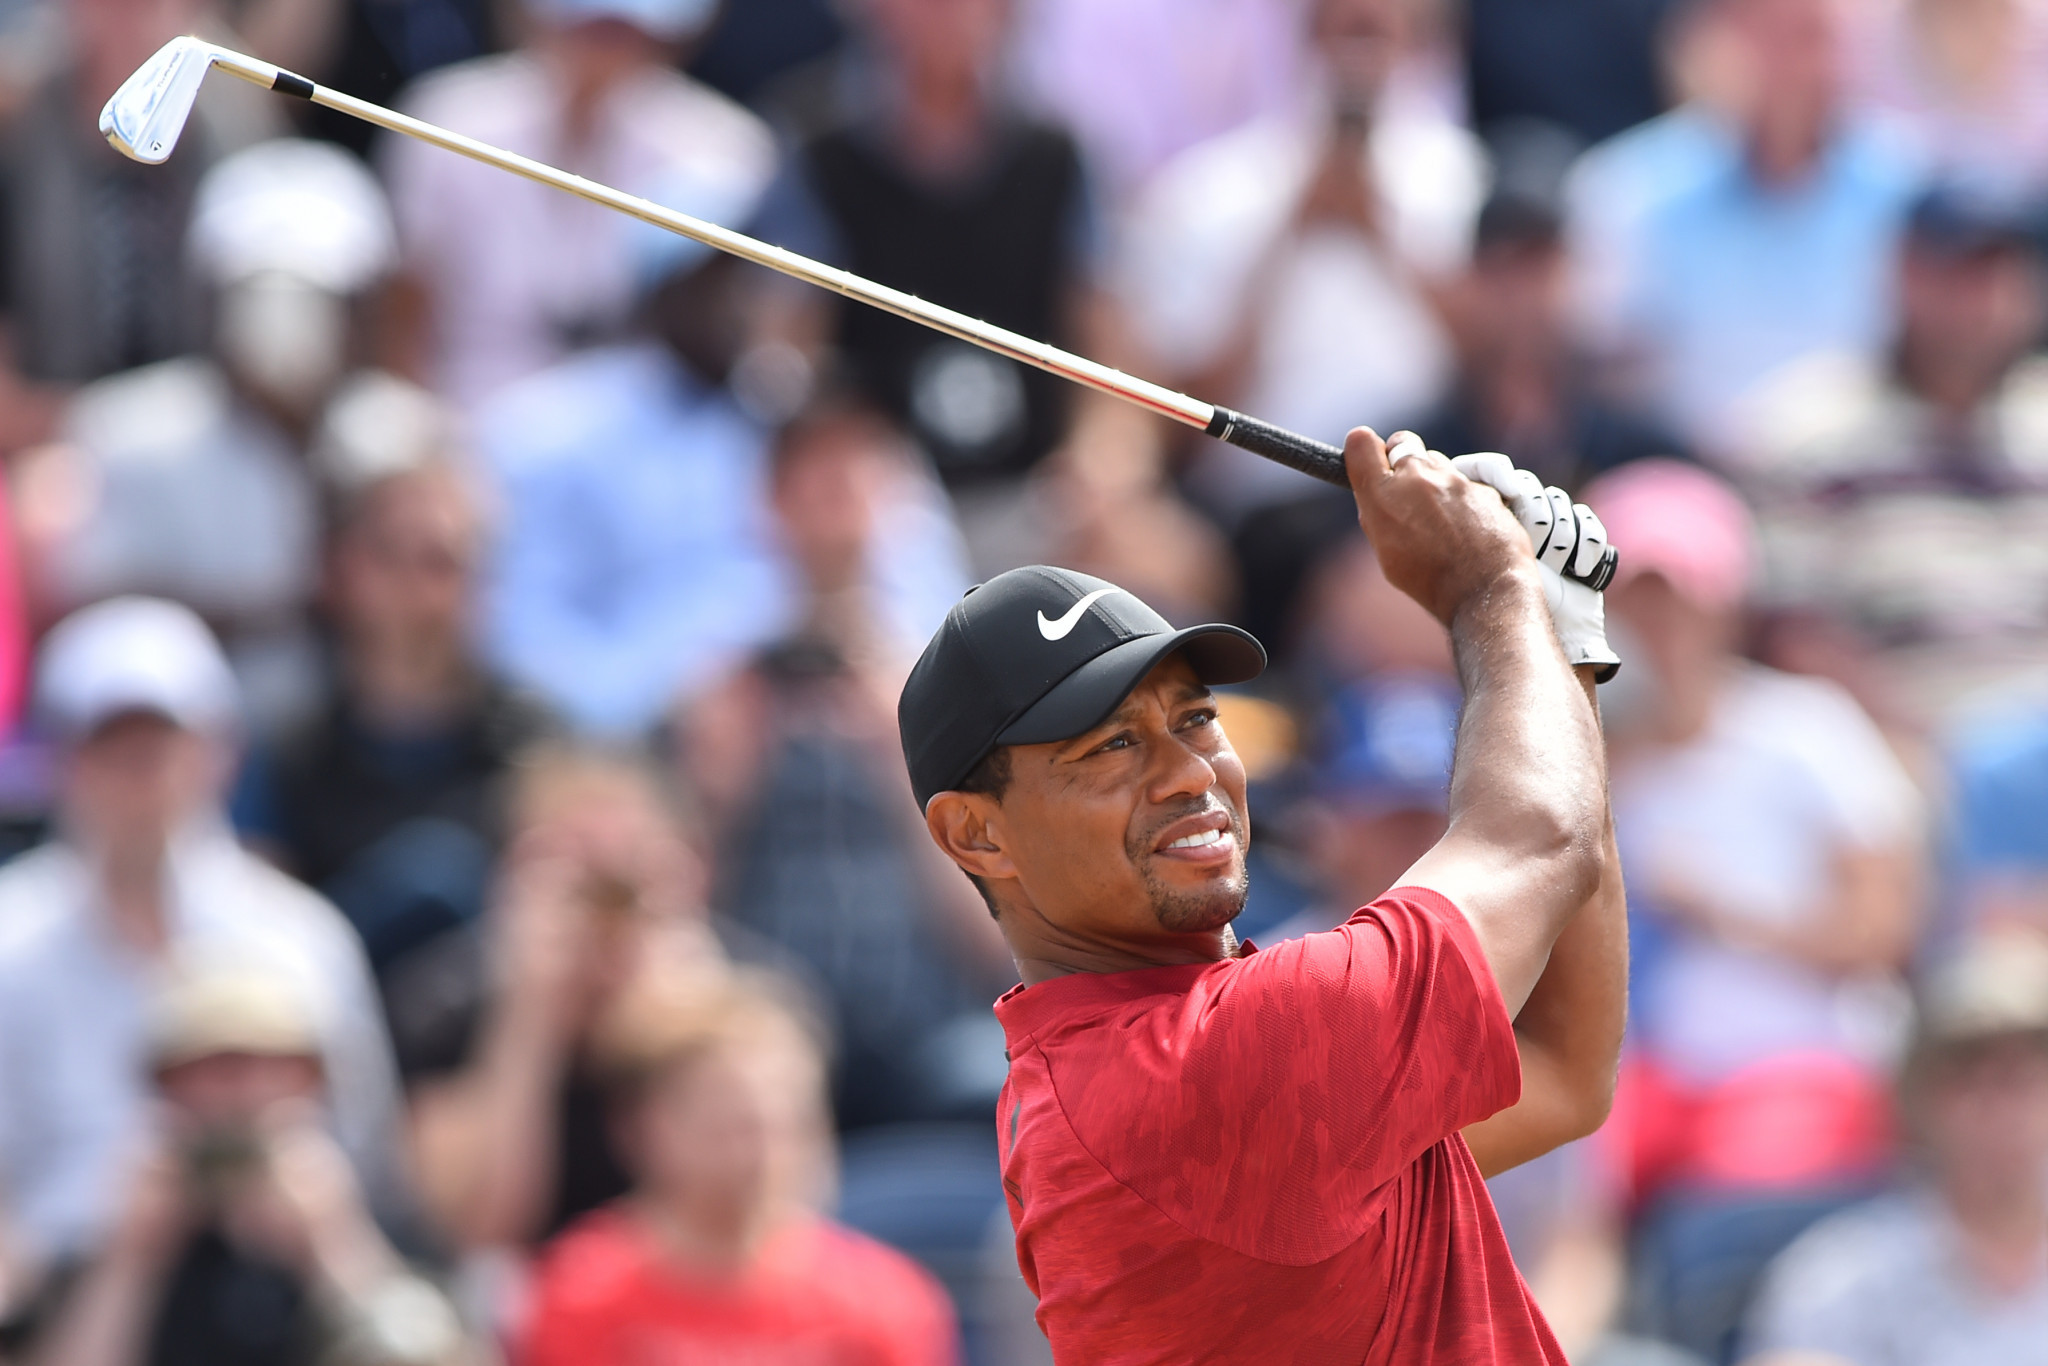 Tiger Woods will be playing in his first World Golf Championships event since the 2014 Bridgestone Invitational ©Getty Images